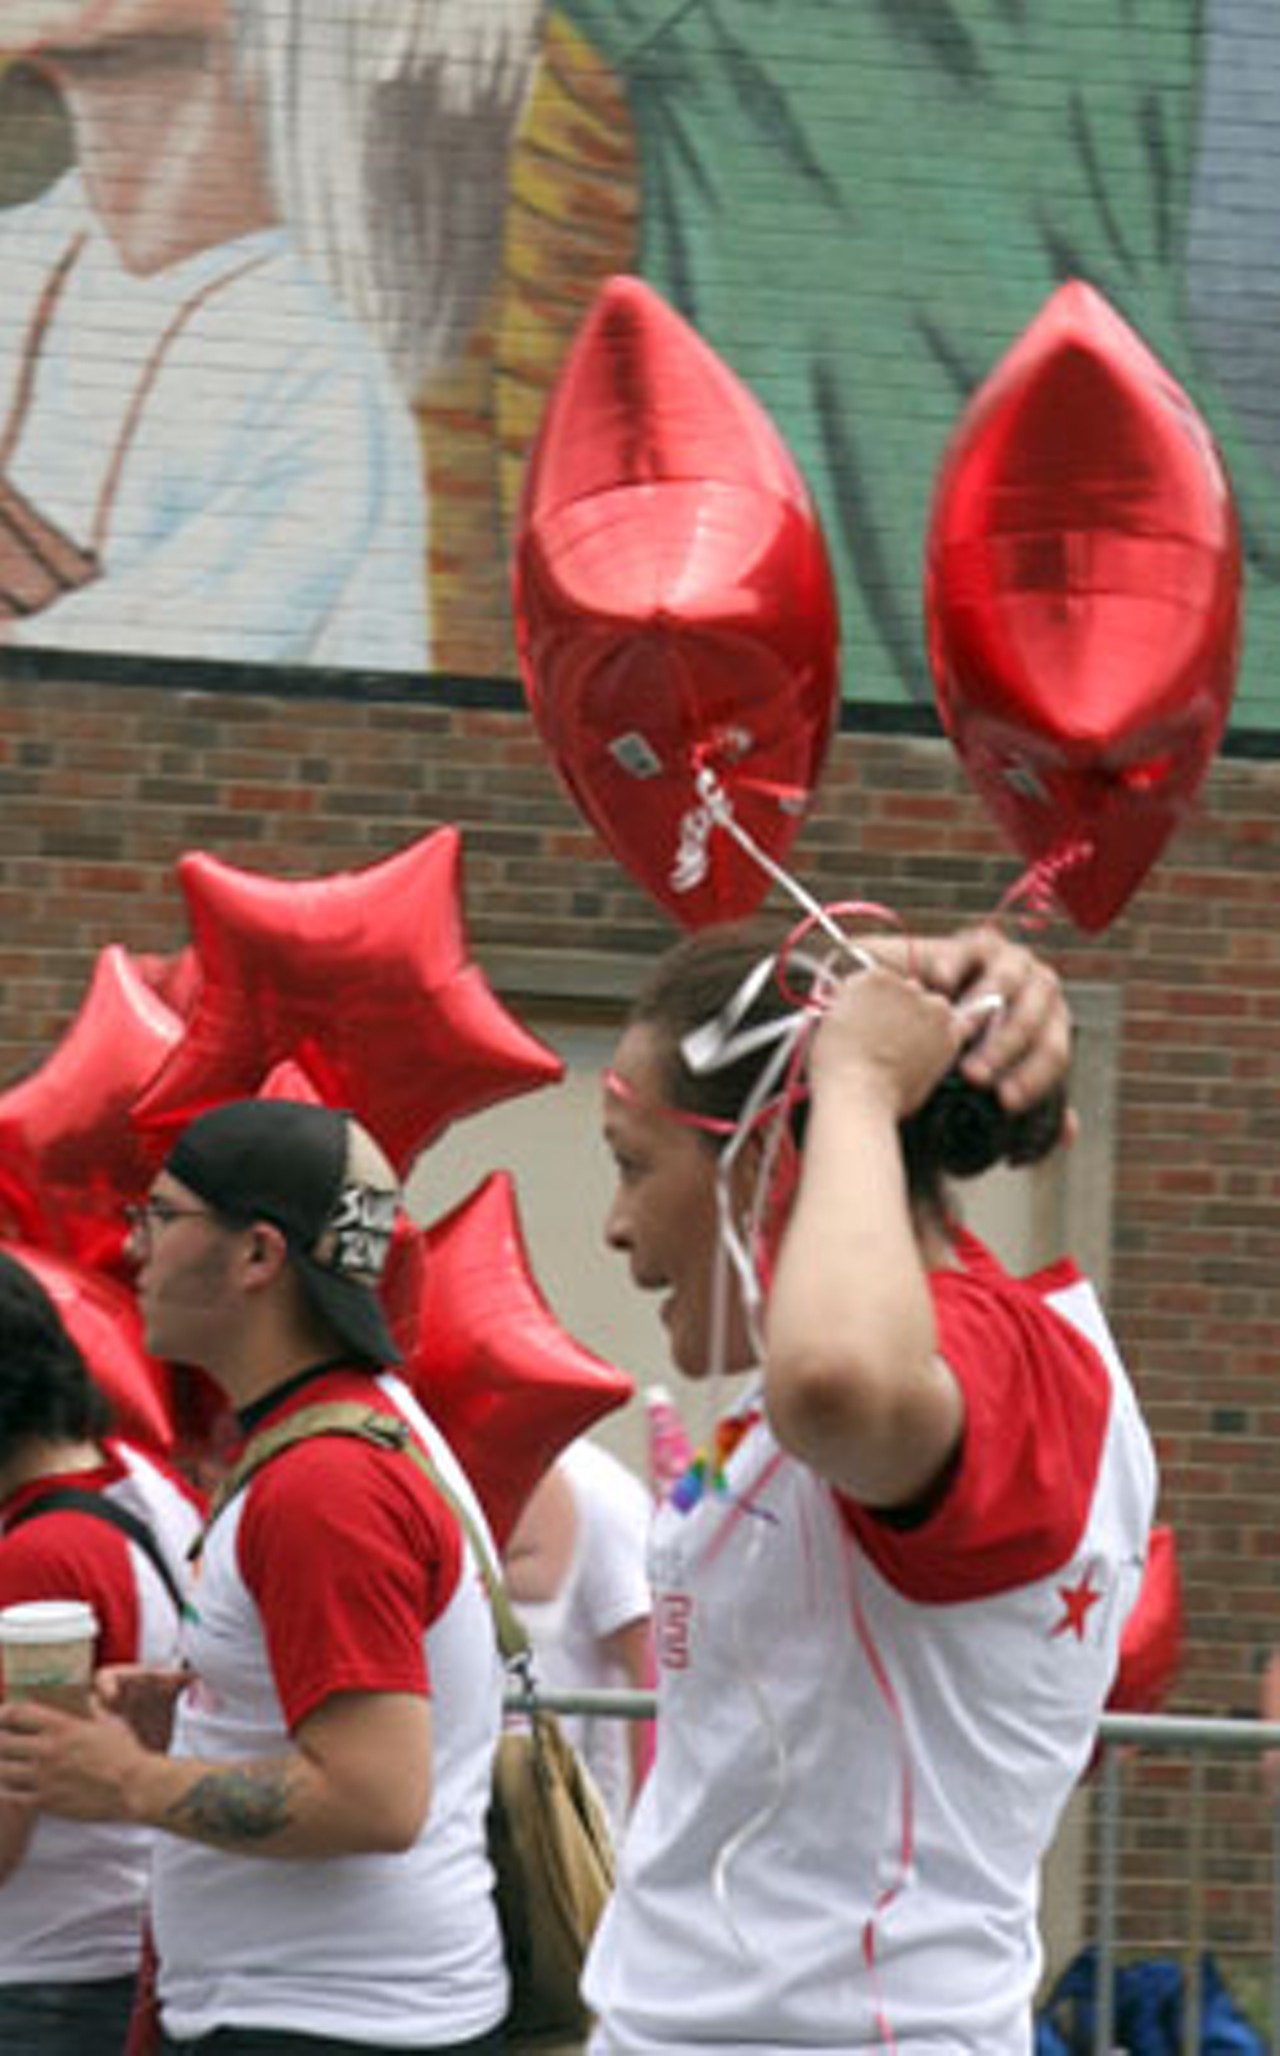 A woman representing Macy's department store ties balloons to her ponytail.